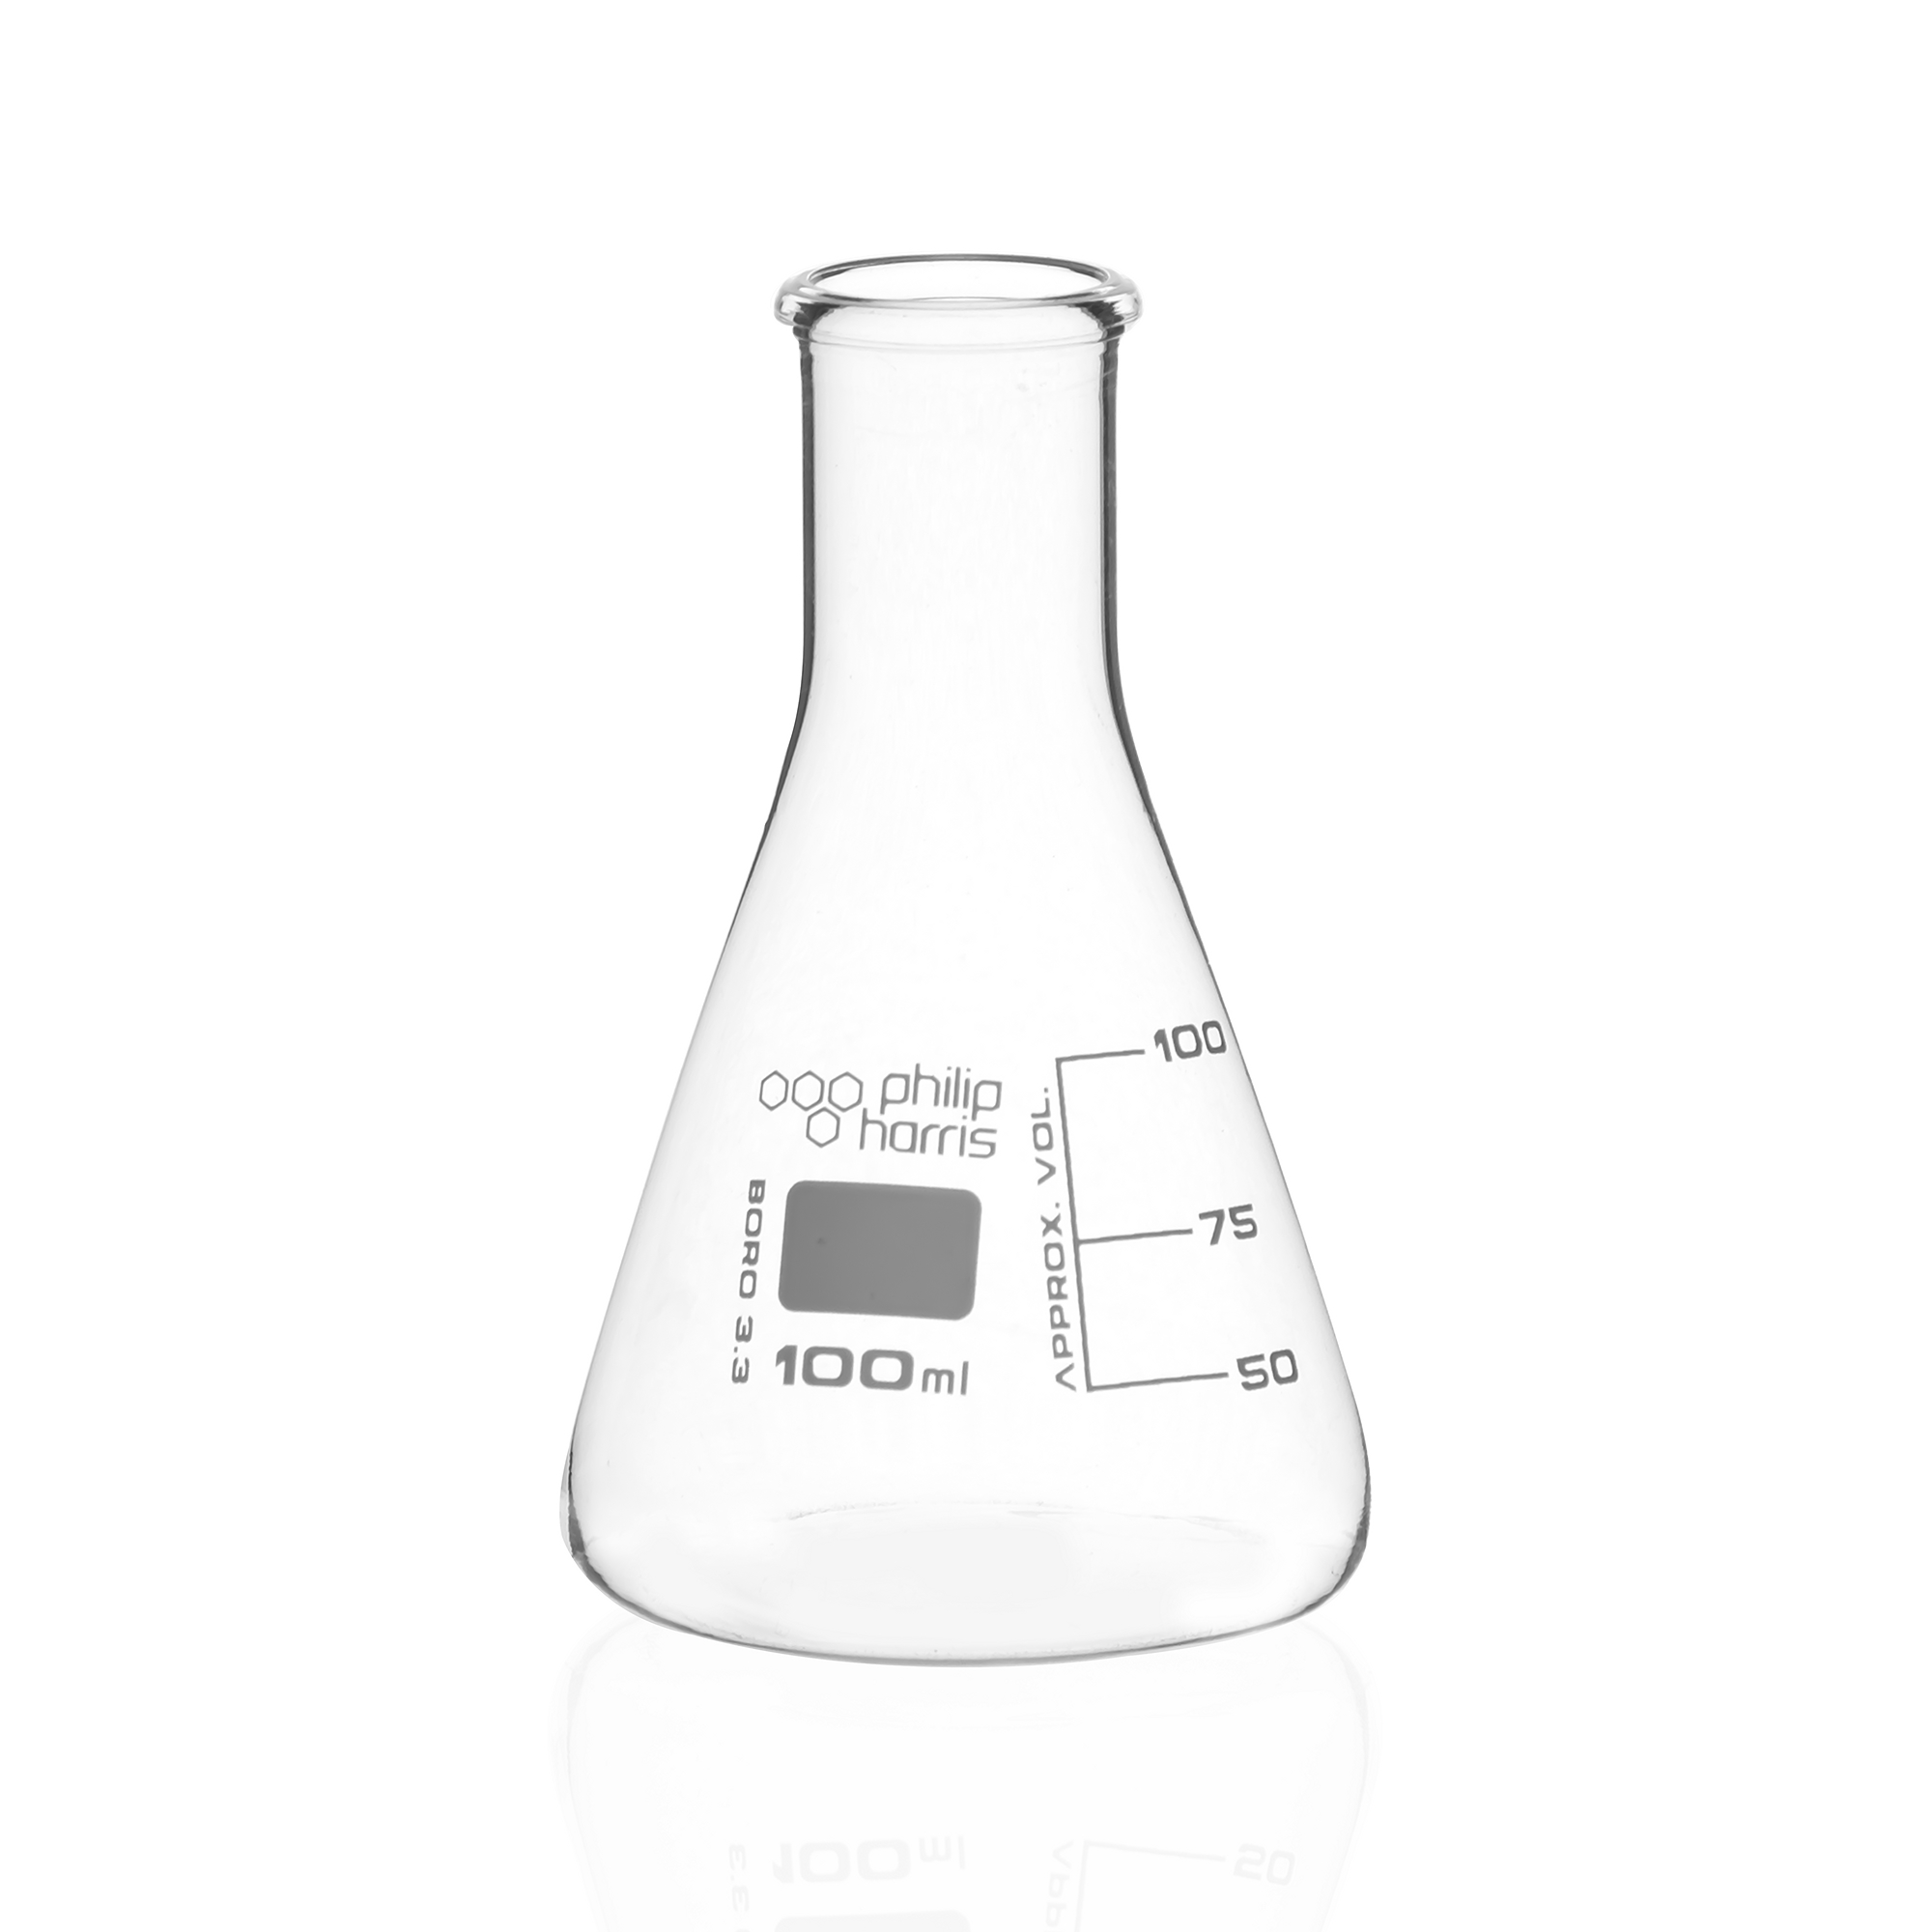 B8R07877 - Philip Harris Narrow Mouth Conical Flask: 100ml - Pack of 12 ...